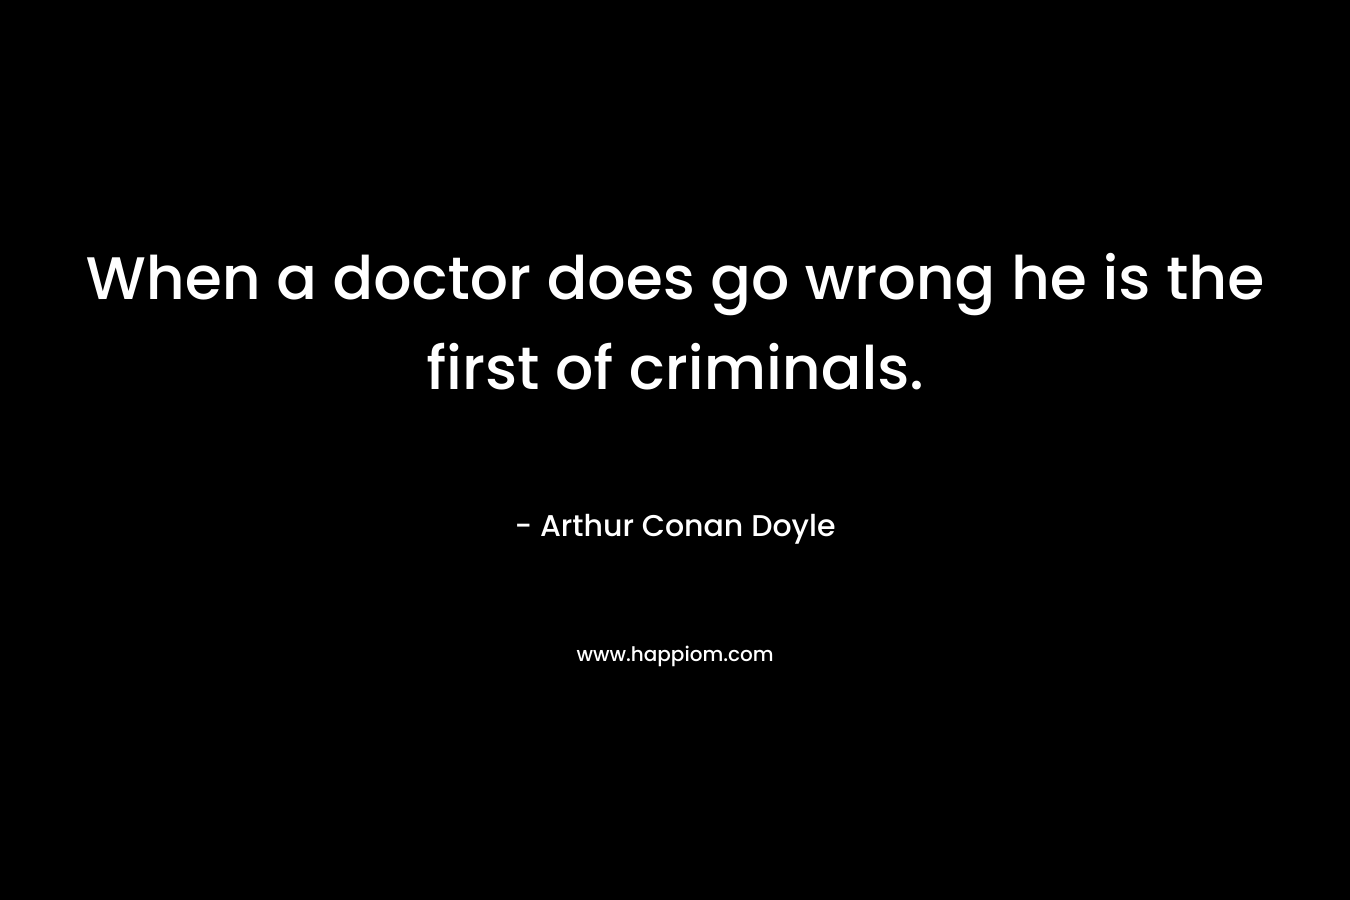 When a doctor does go wrong he is the first of criminals.